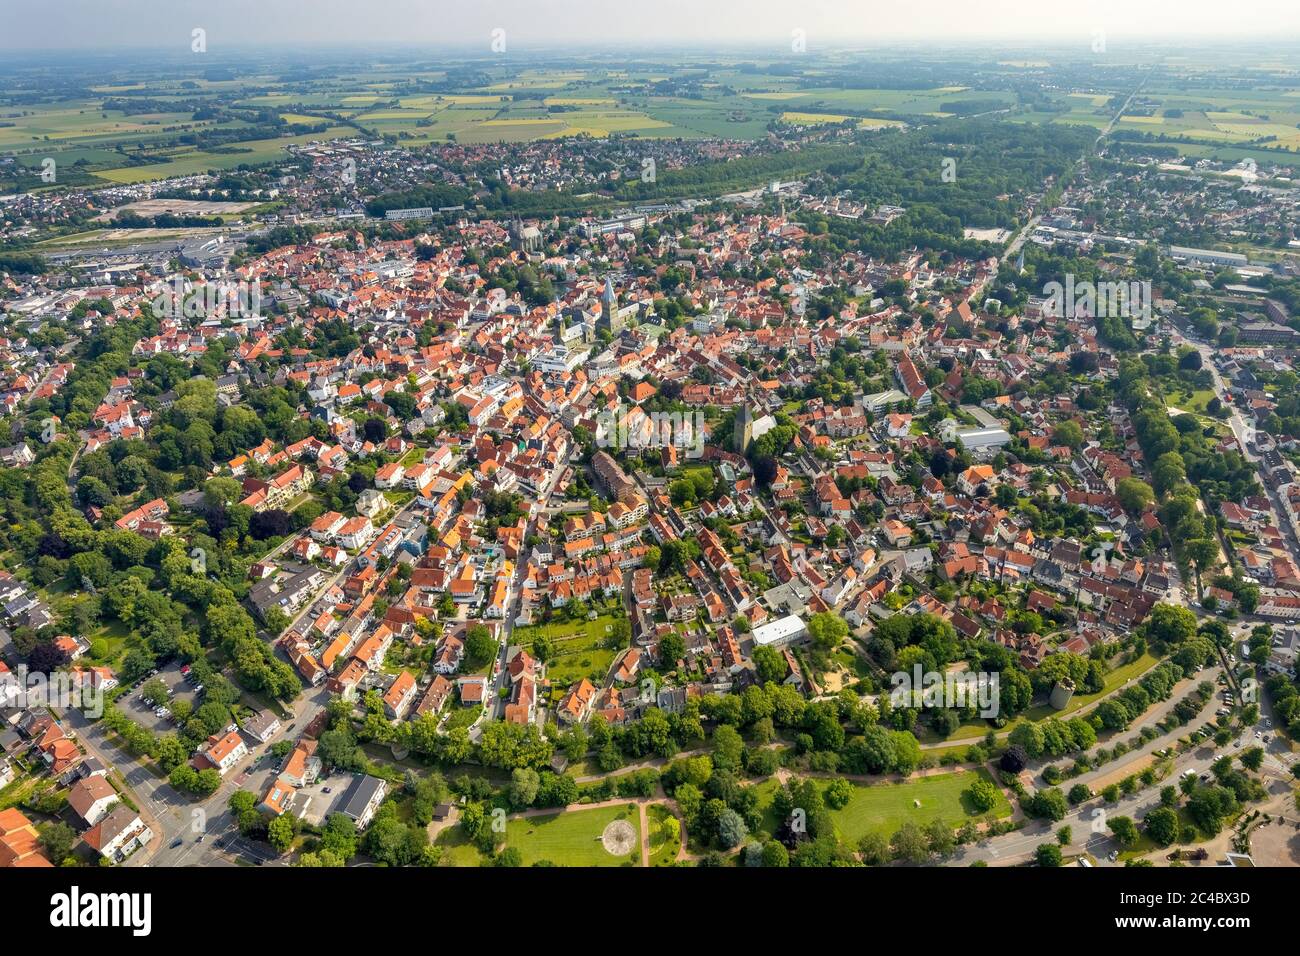 view of the inner city from the south, 06.07.2019, aerial view, Germany, North Rhine-Westphalia, Soest Stock Photo